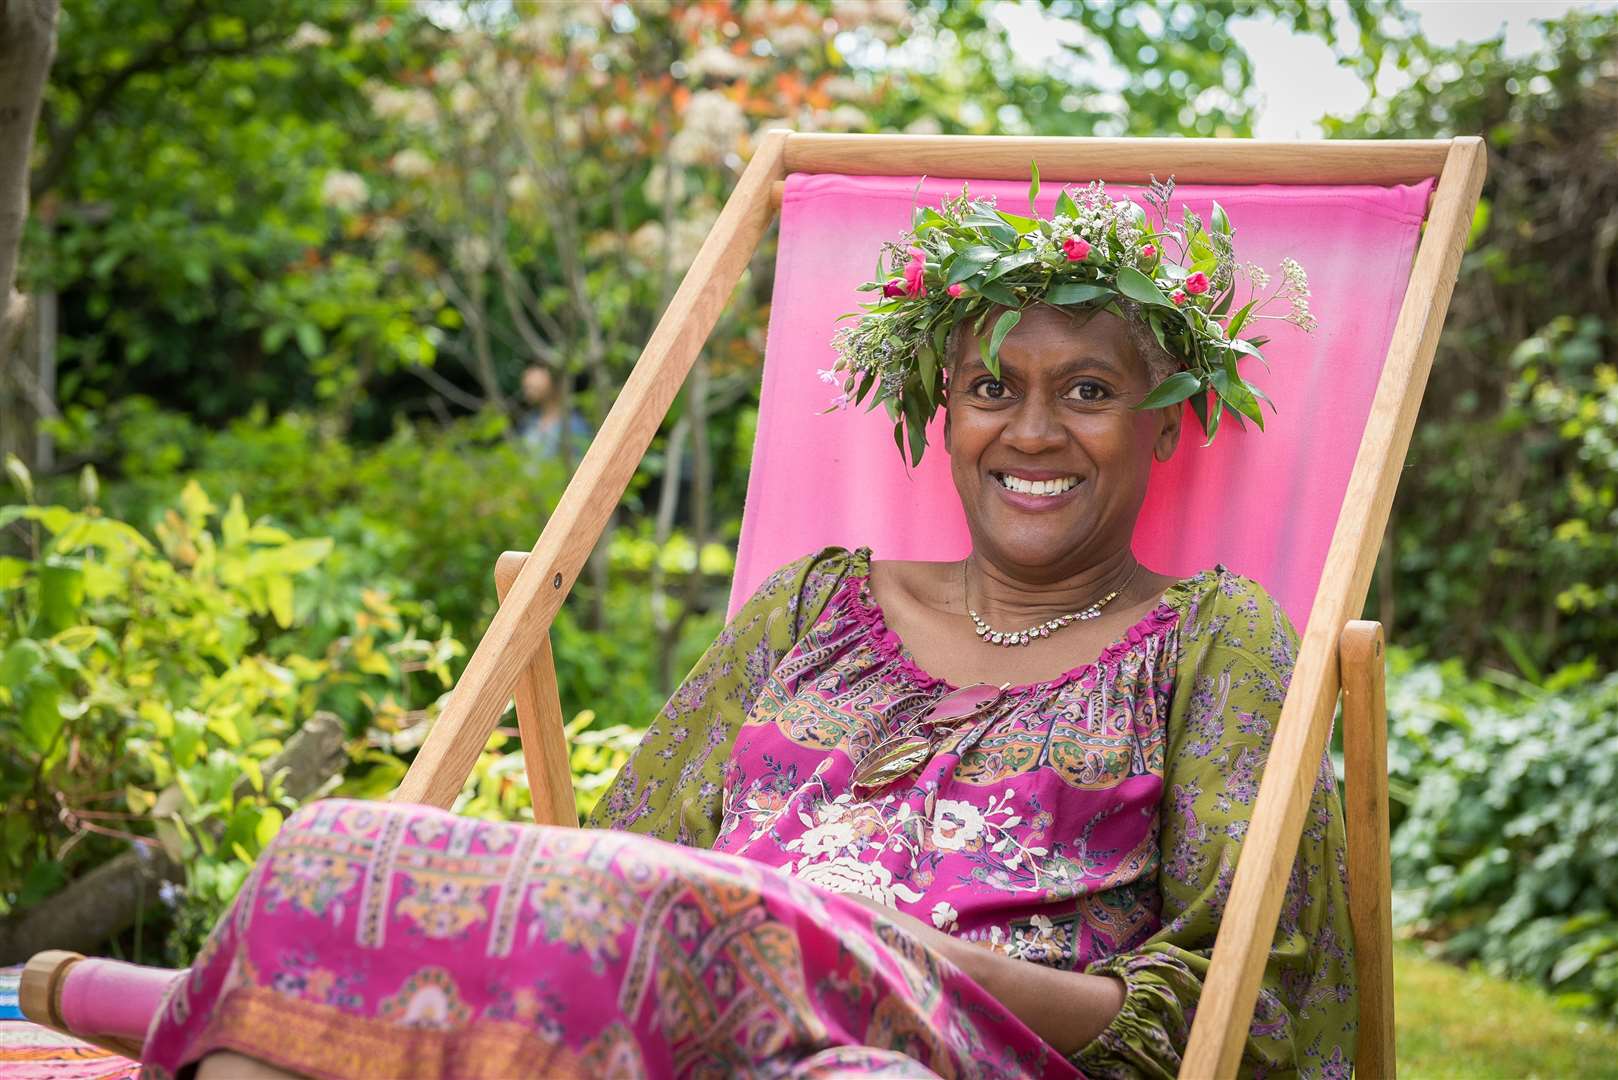 BBC Gardeners' World presenter Arit Anderson is supporting Garden Day 2020. Picture: James Baily Photography/PA